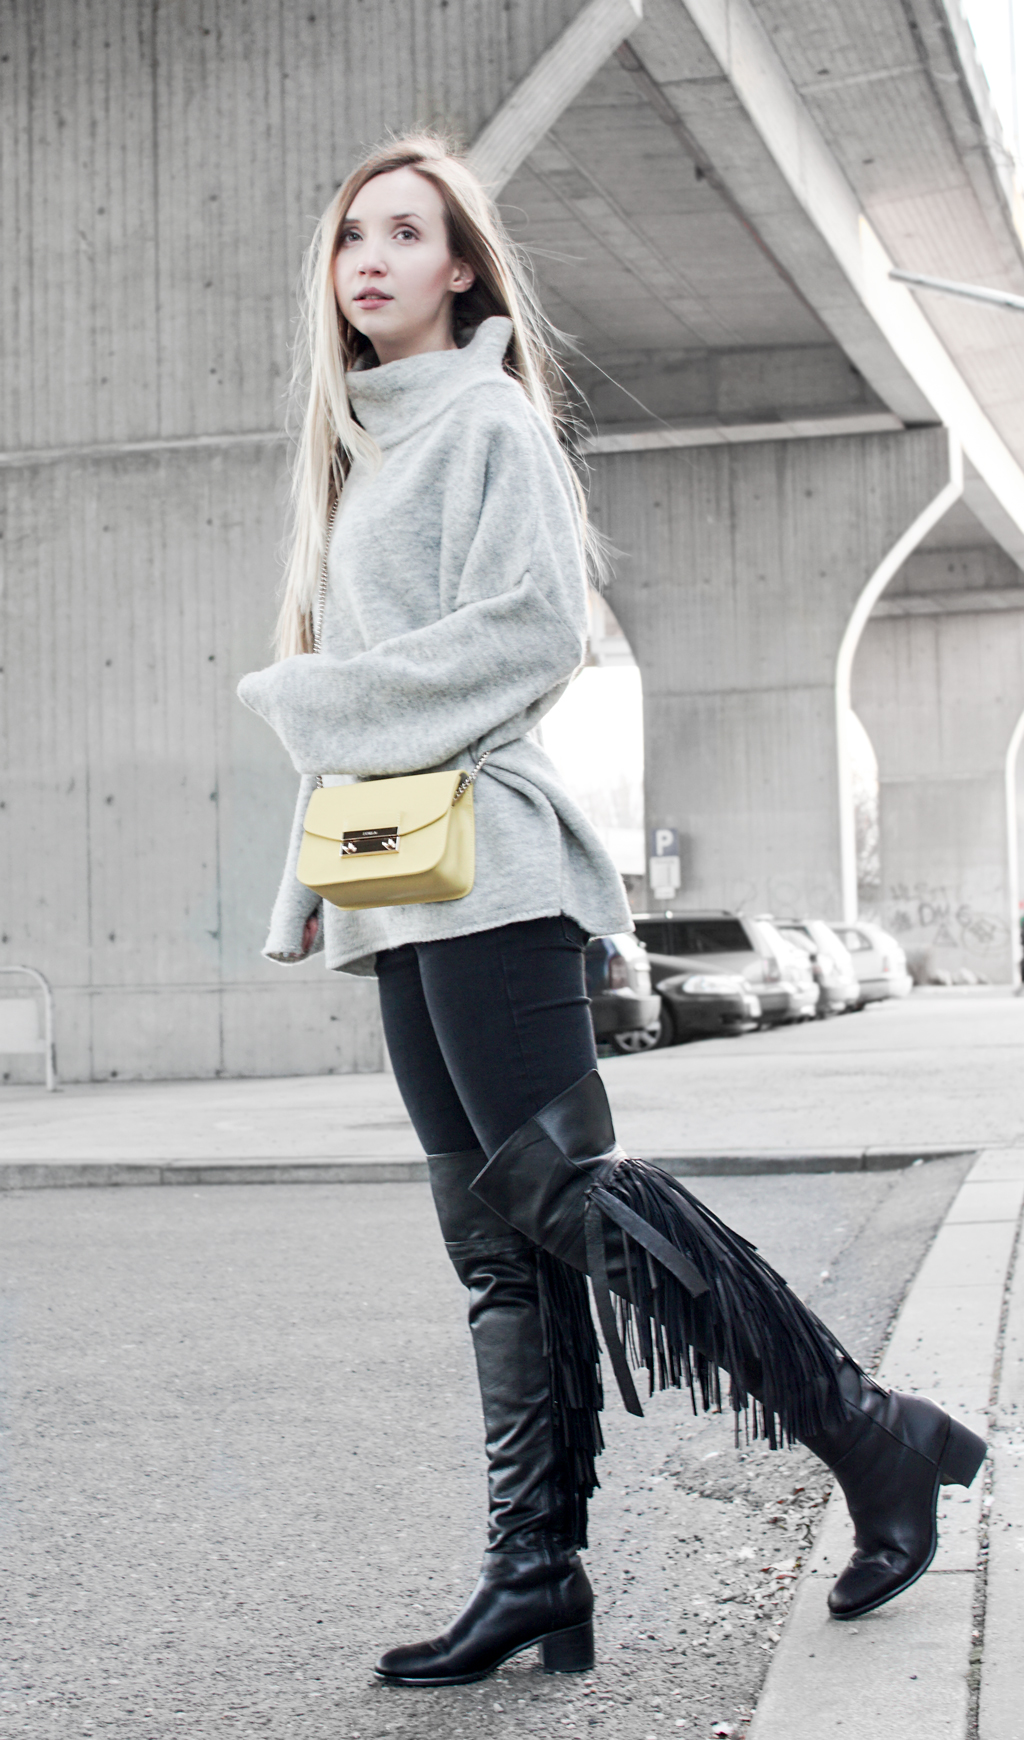 How to take outfit photos in the winter. Furla Metropolis Bag, Oversized Sweater, Overknee Boots